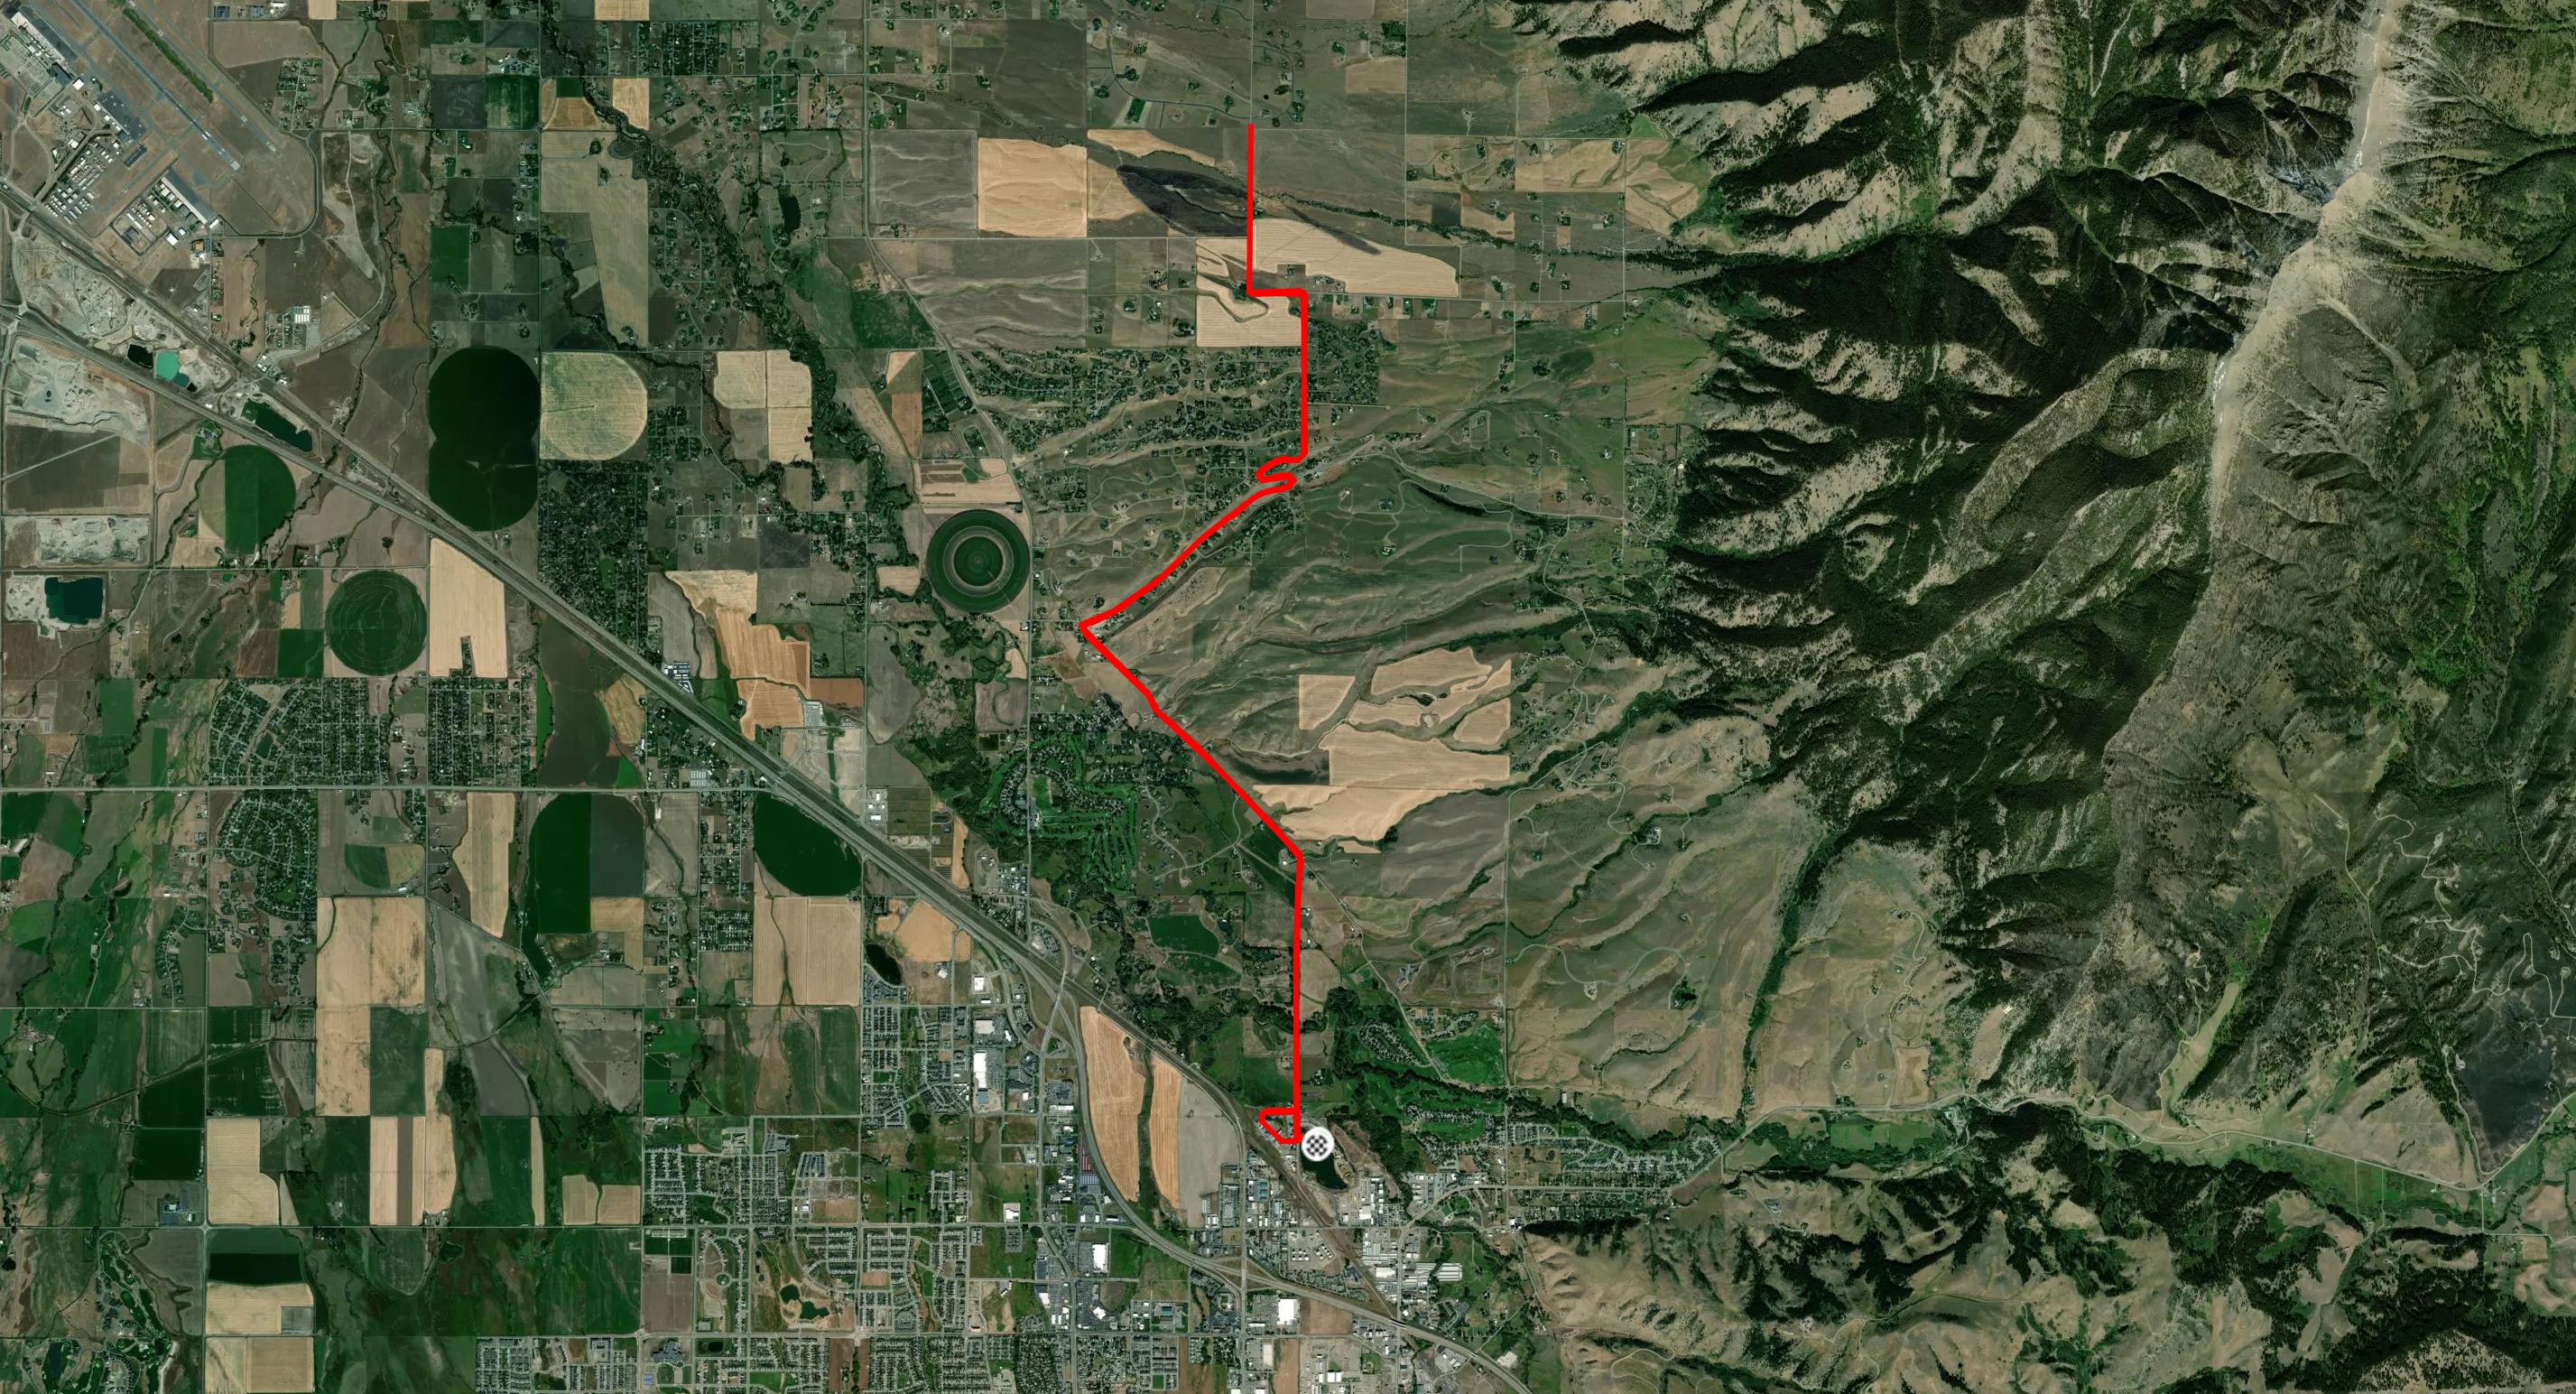 A satellite view of the area around Glen Lake Rotary Park, showing the GPS track from my bike.